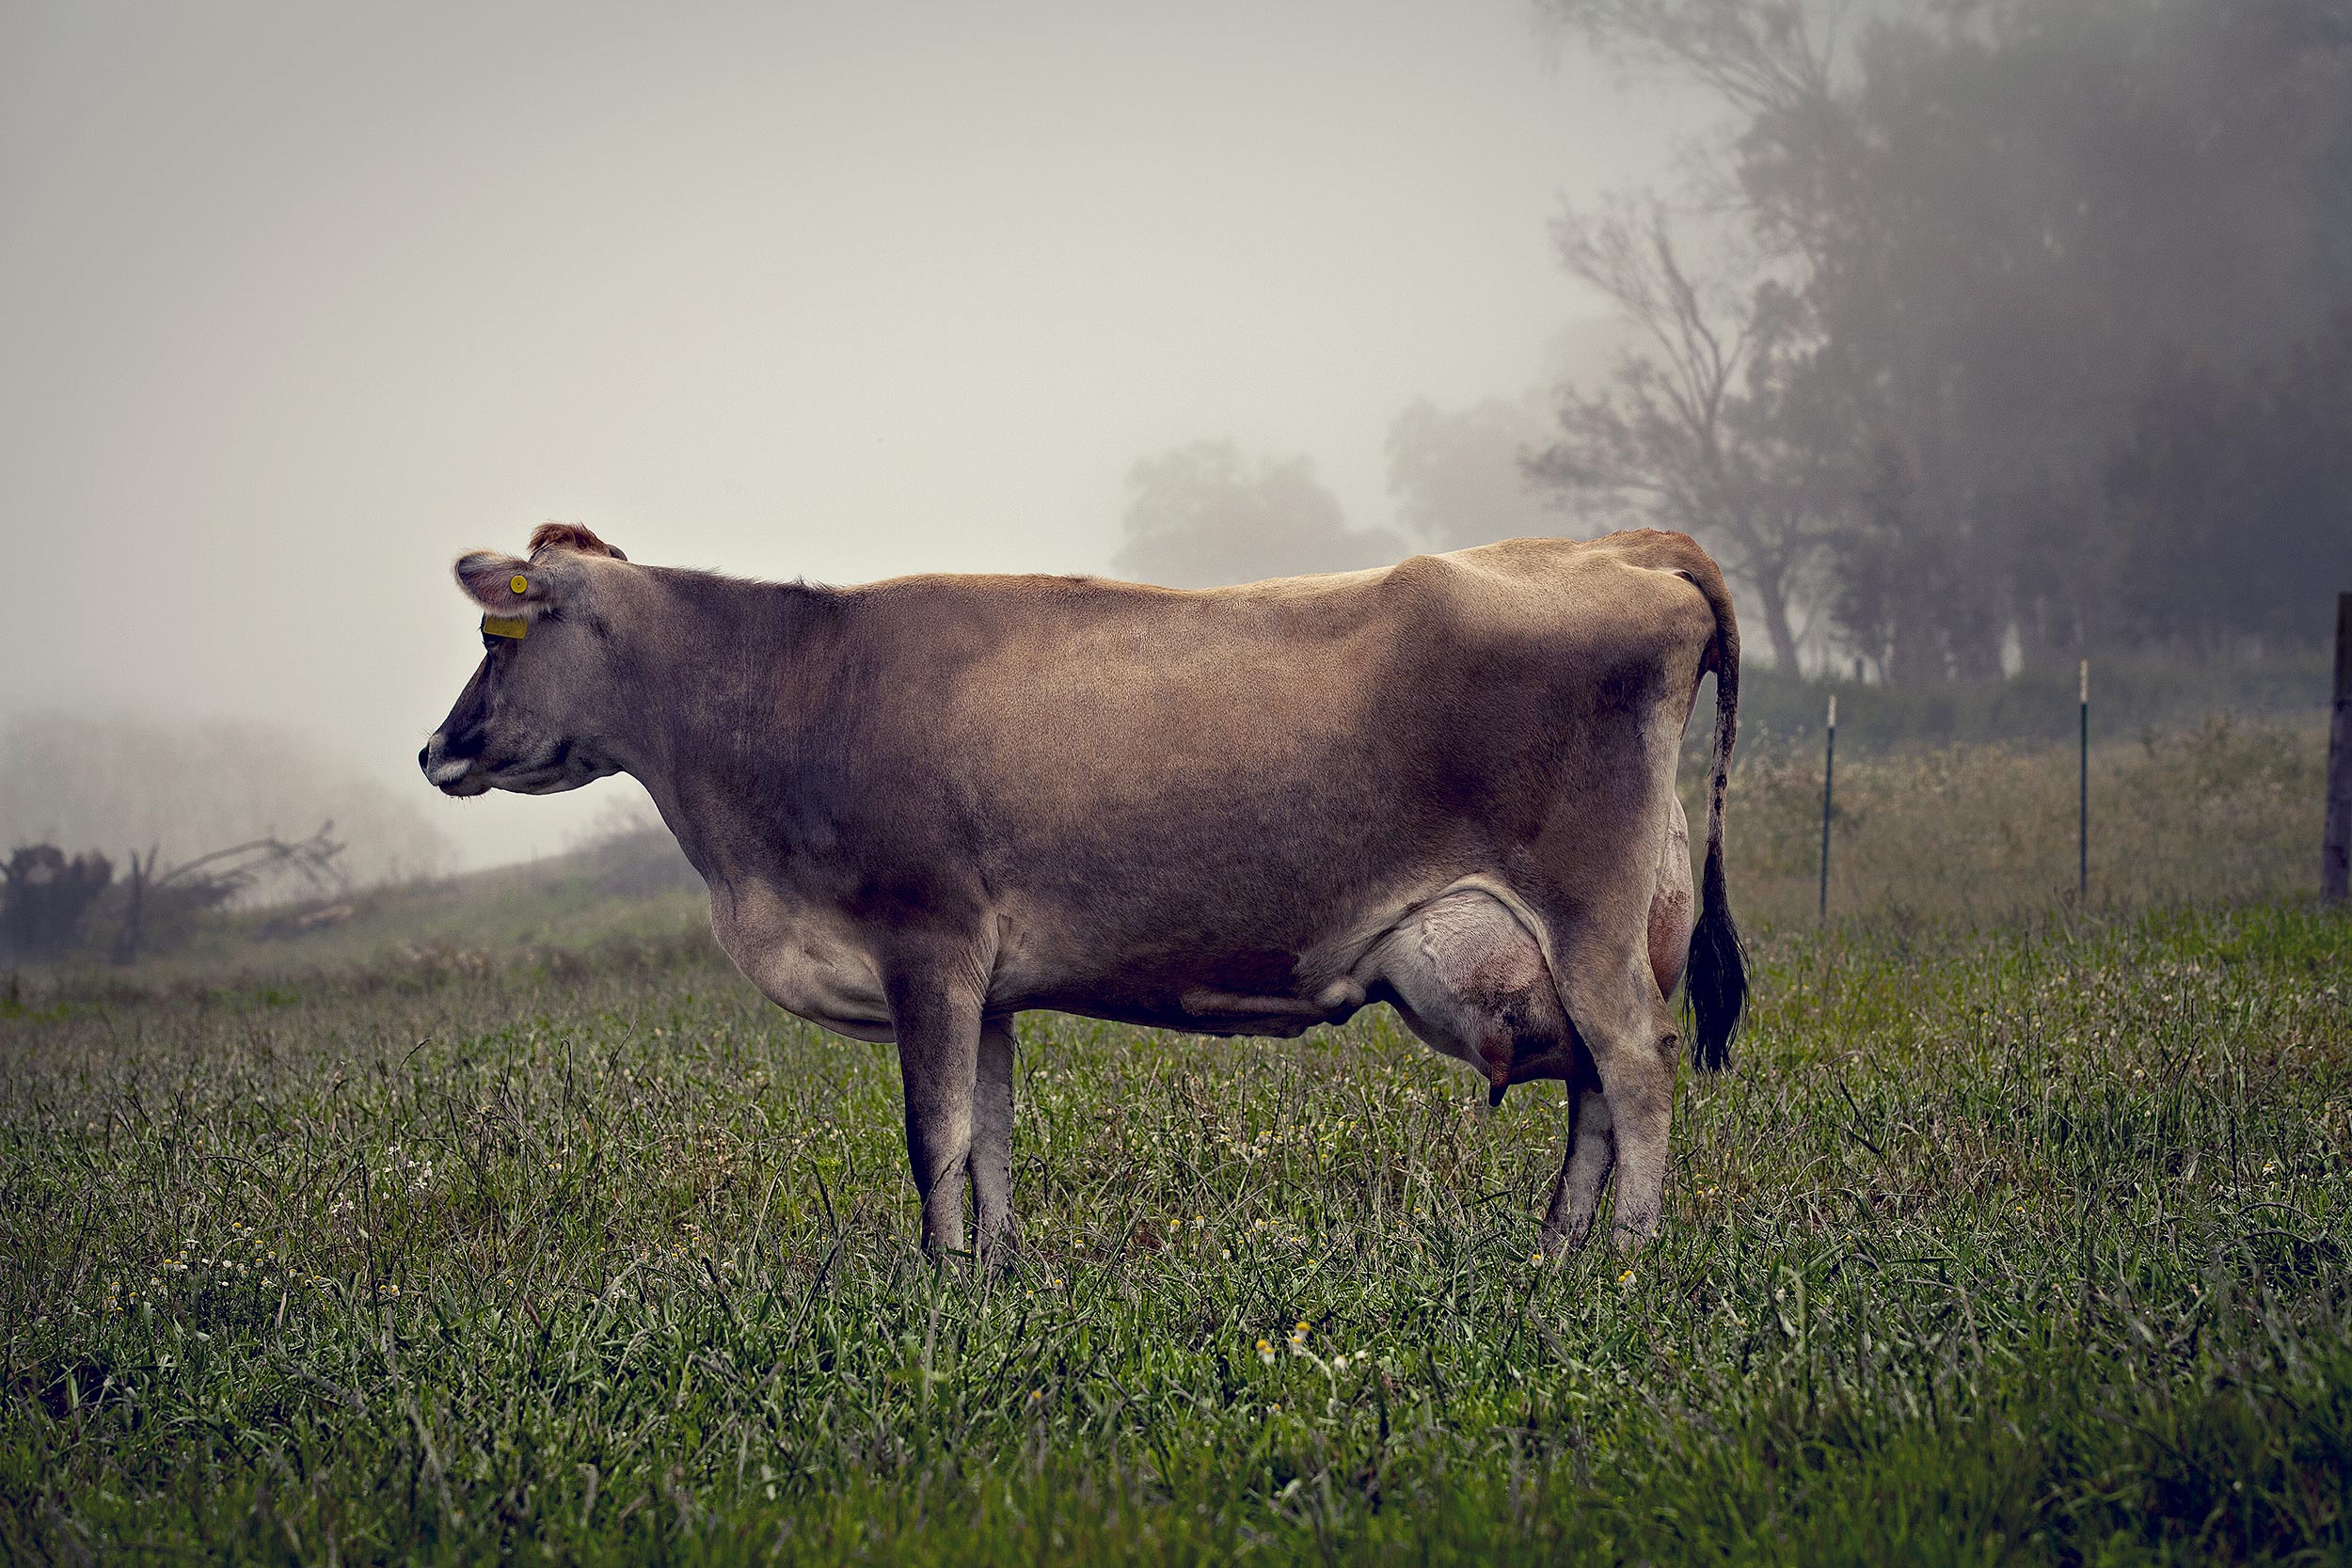 Jersey dairy cow portrait in a pasture surrounded by fog. Livestock and agriculture photography